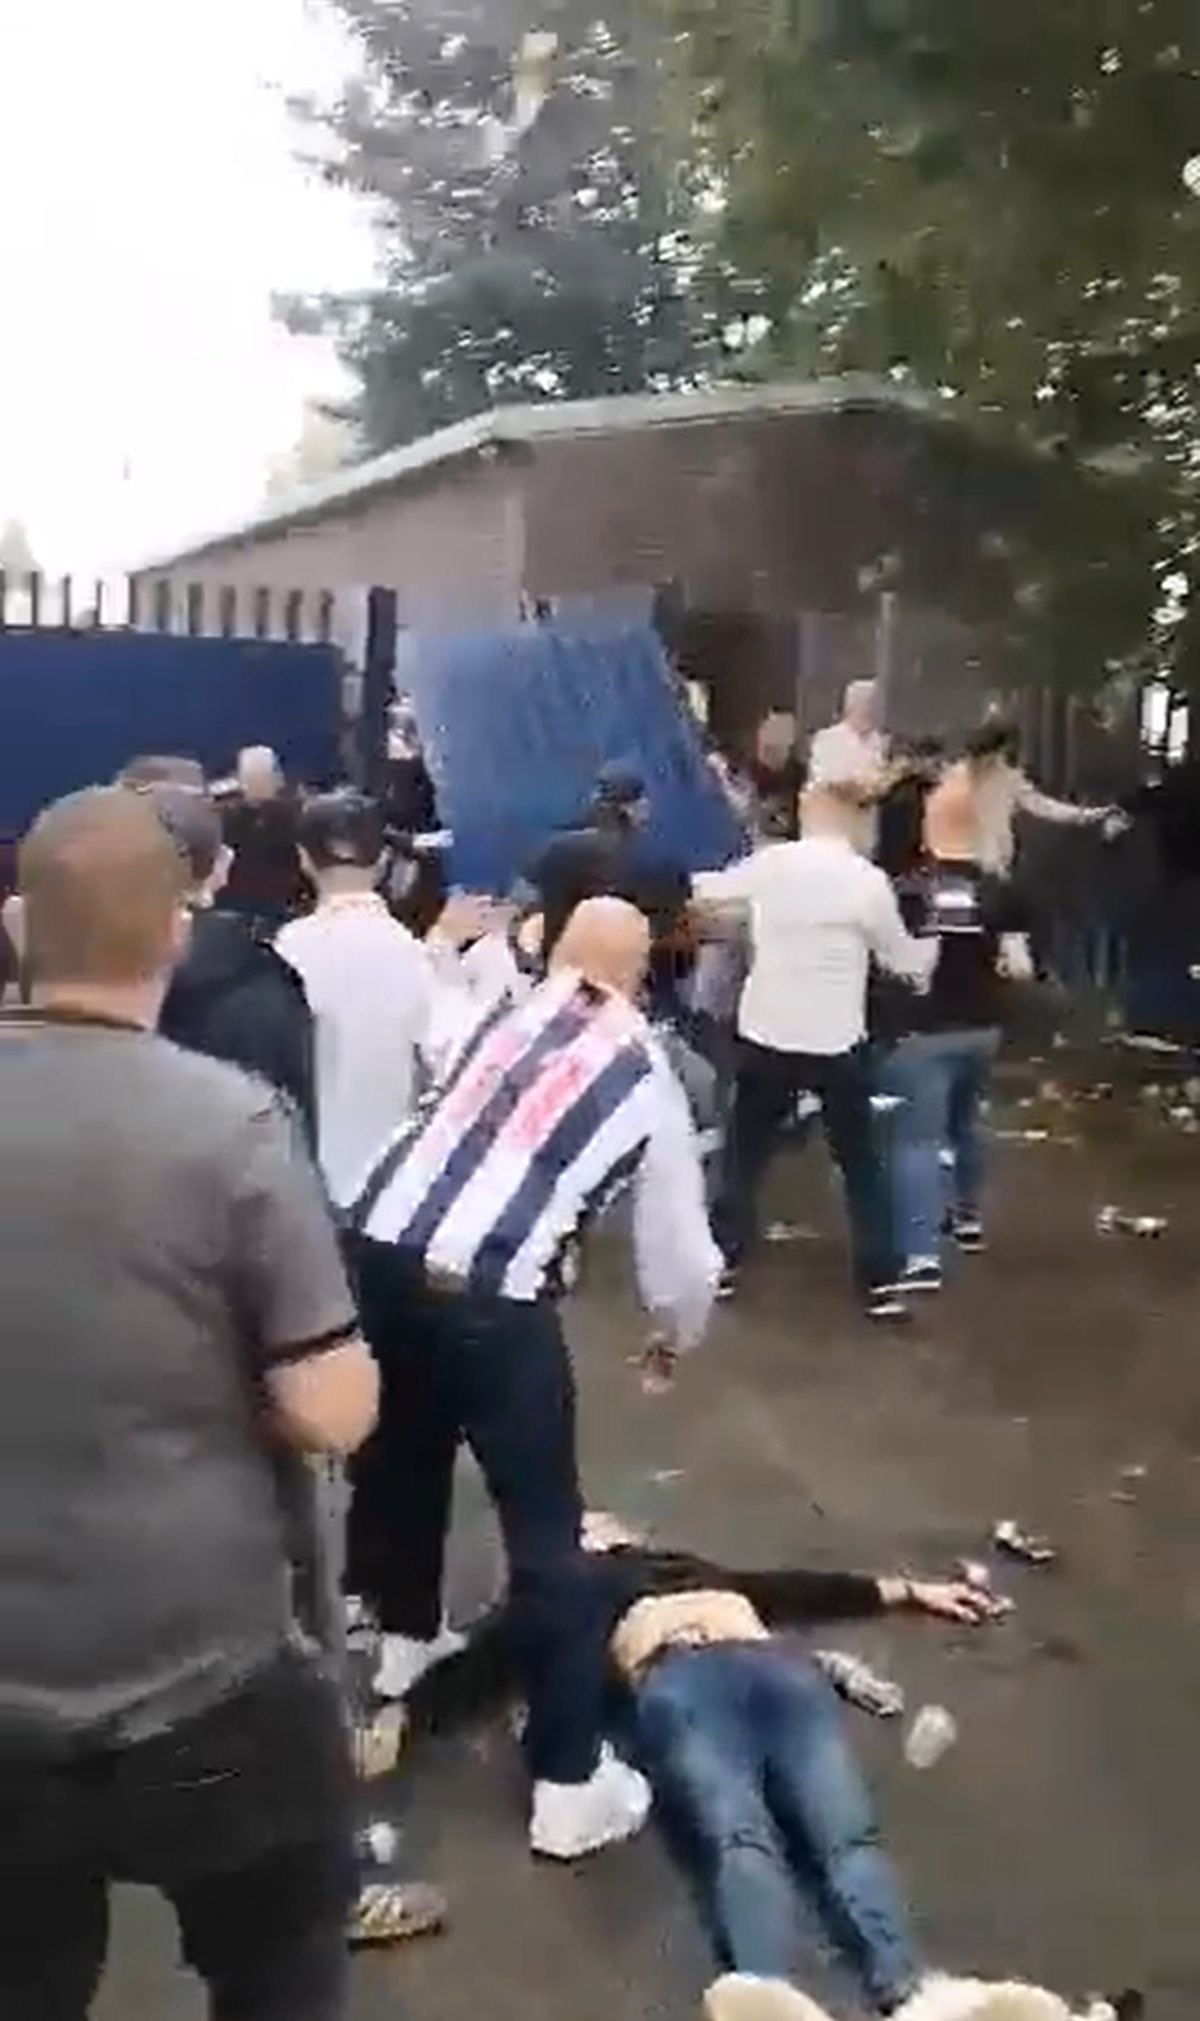 Violence outside The Hawthorns was caught on camera and shared on social media. Photo: Twitter